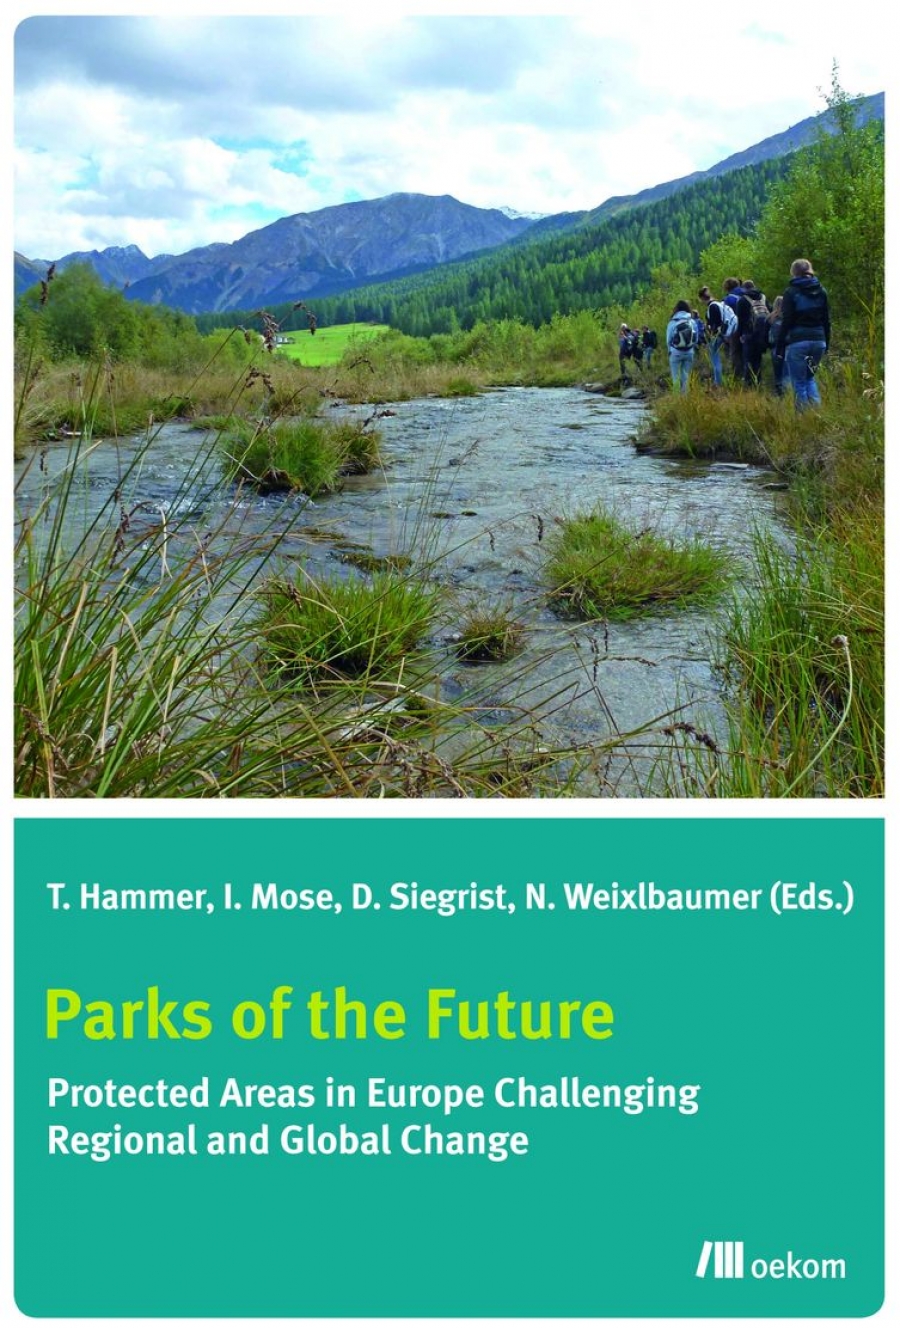 Buchtipp: “Parks of the Future -  Protected Areas in Europe Challenging Regional and Global Change”